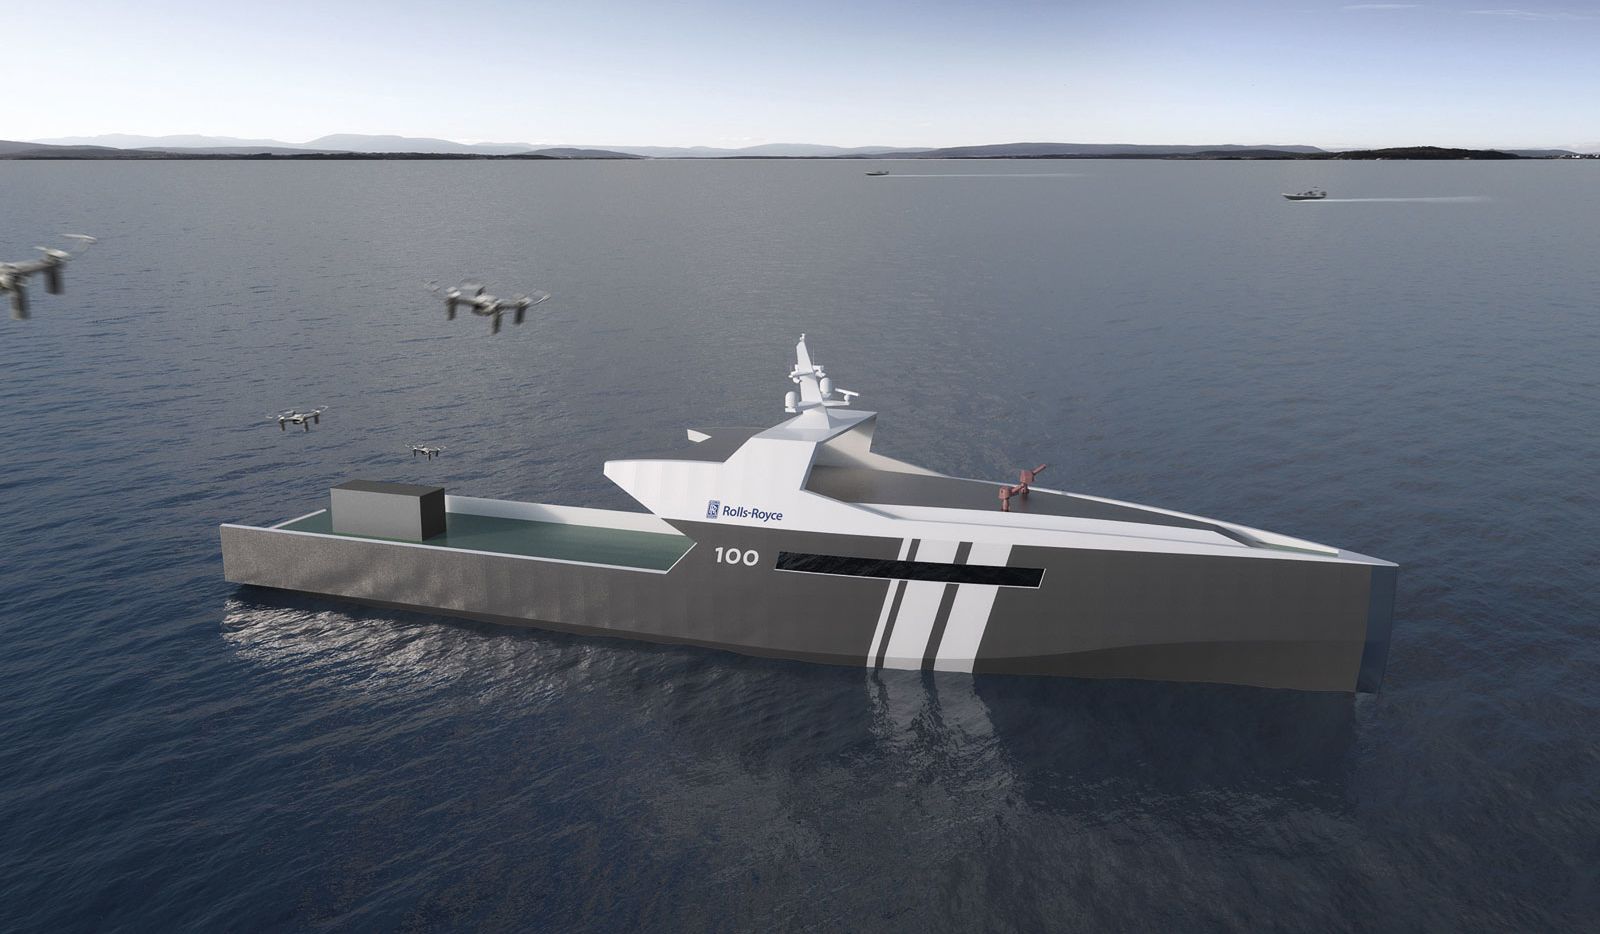 Rolls-Royce will create an unmanned warship